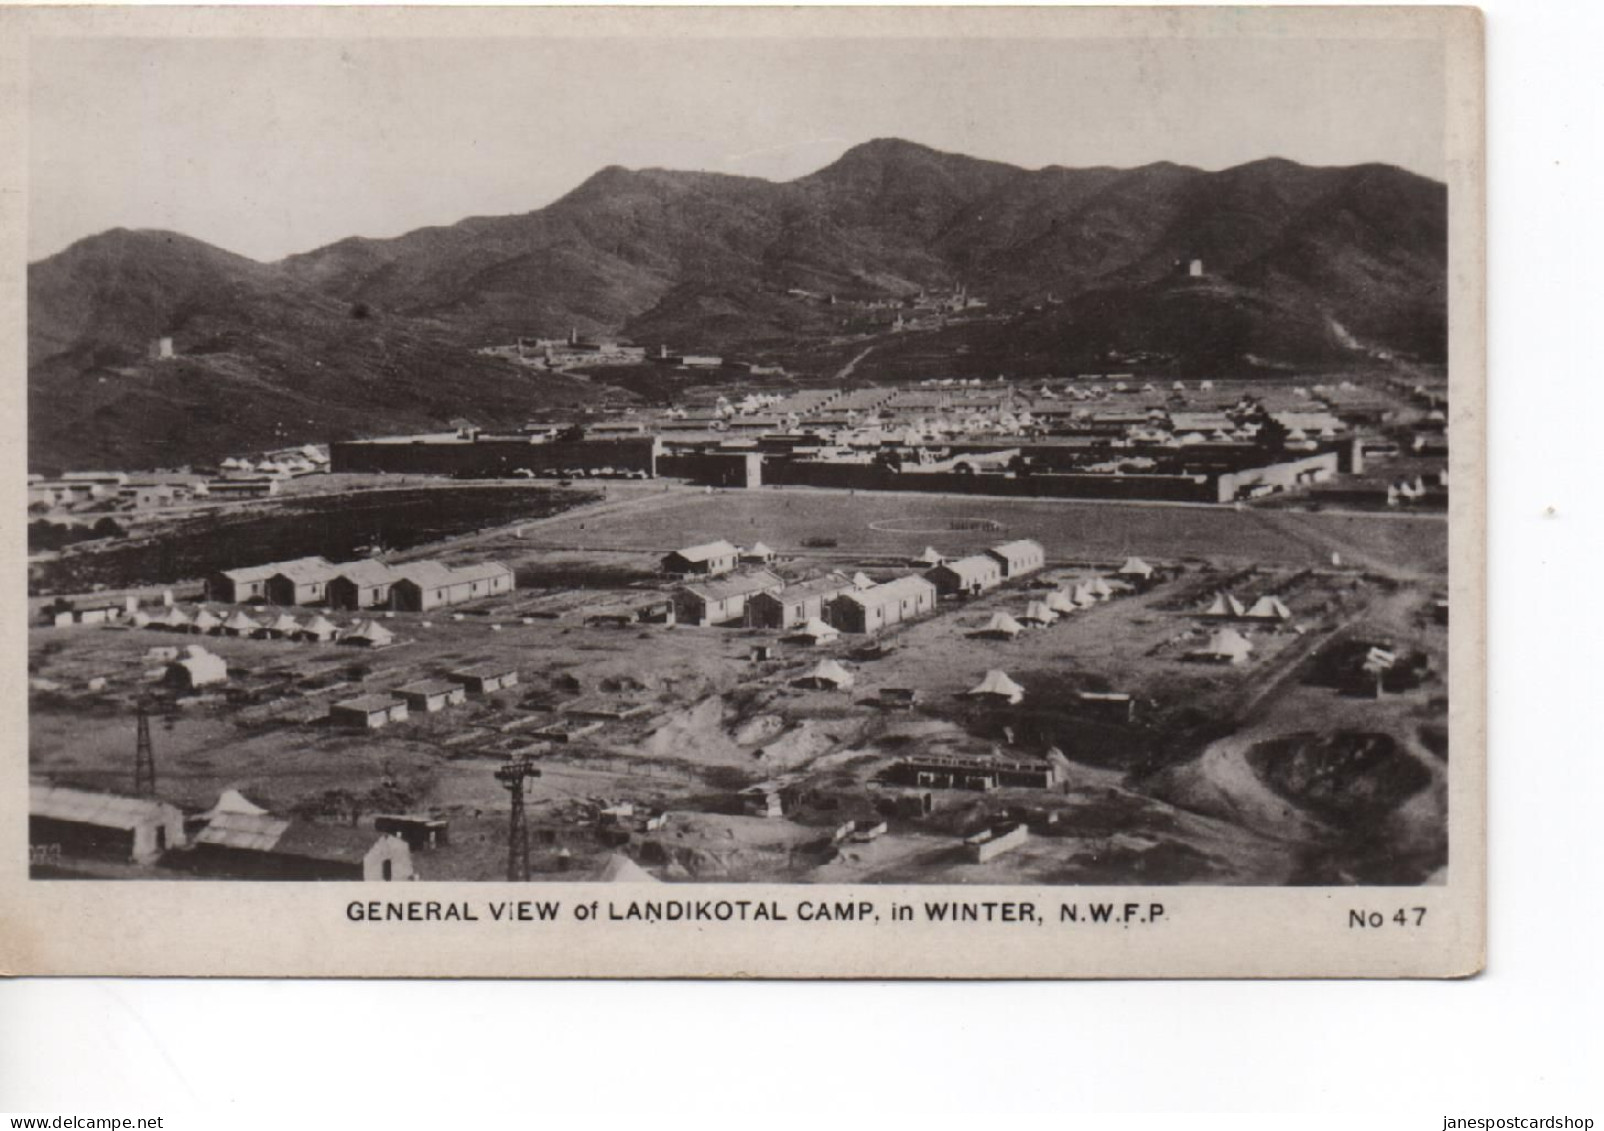 REAL PHOTOGRAPHIC POSTCARD - GENERAL VIEW OF LANDIKOTAL CAMP IN WINTER - N.W.F.PAKISTAN - Pakistán